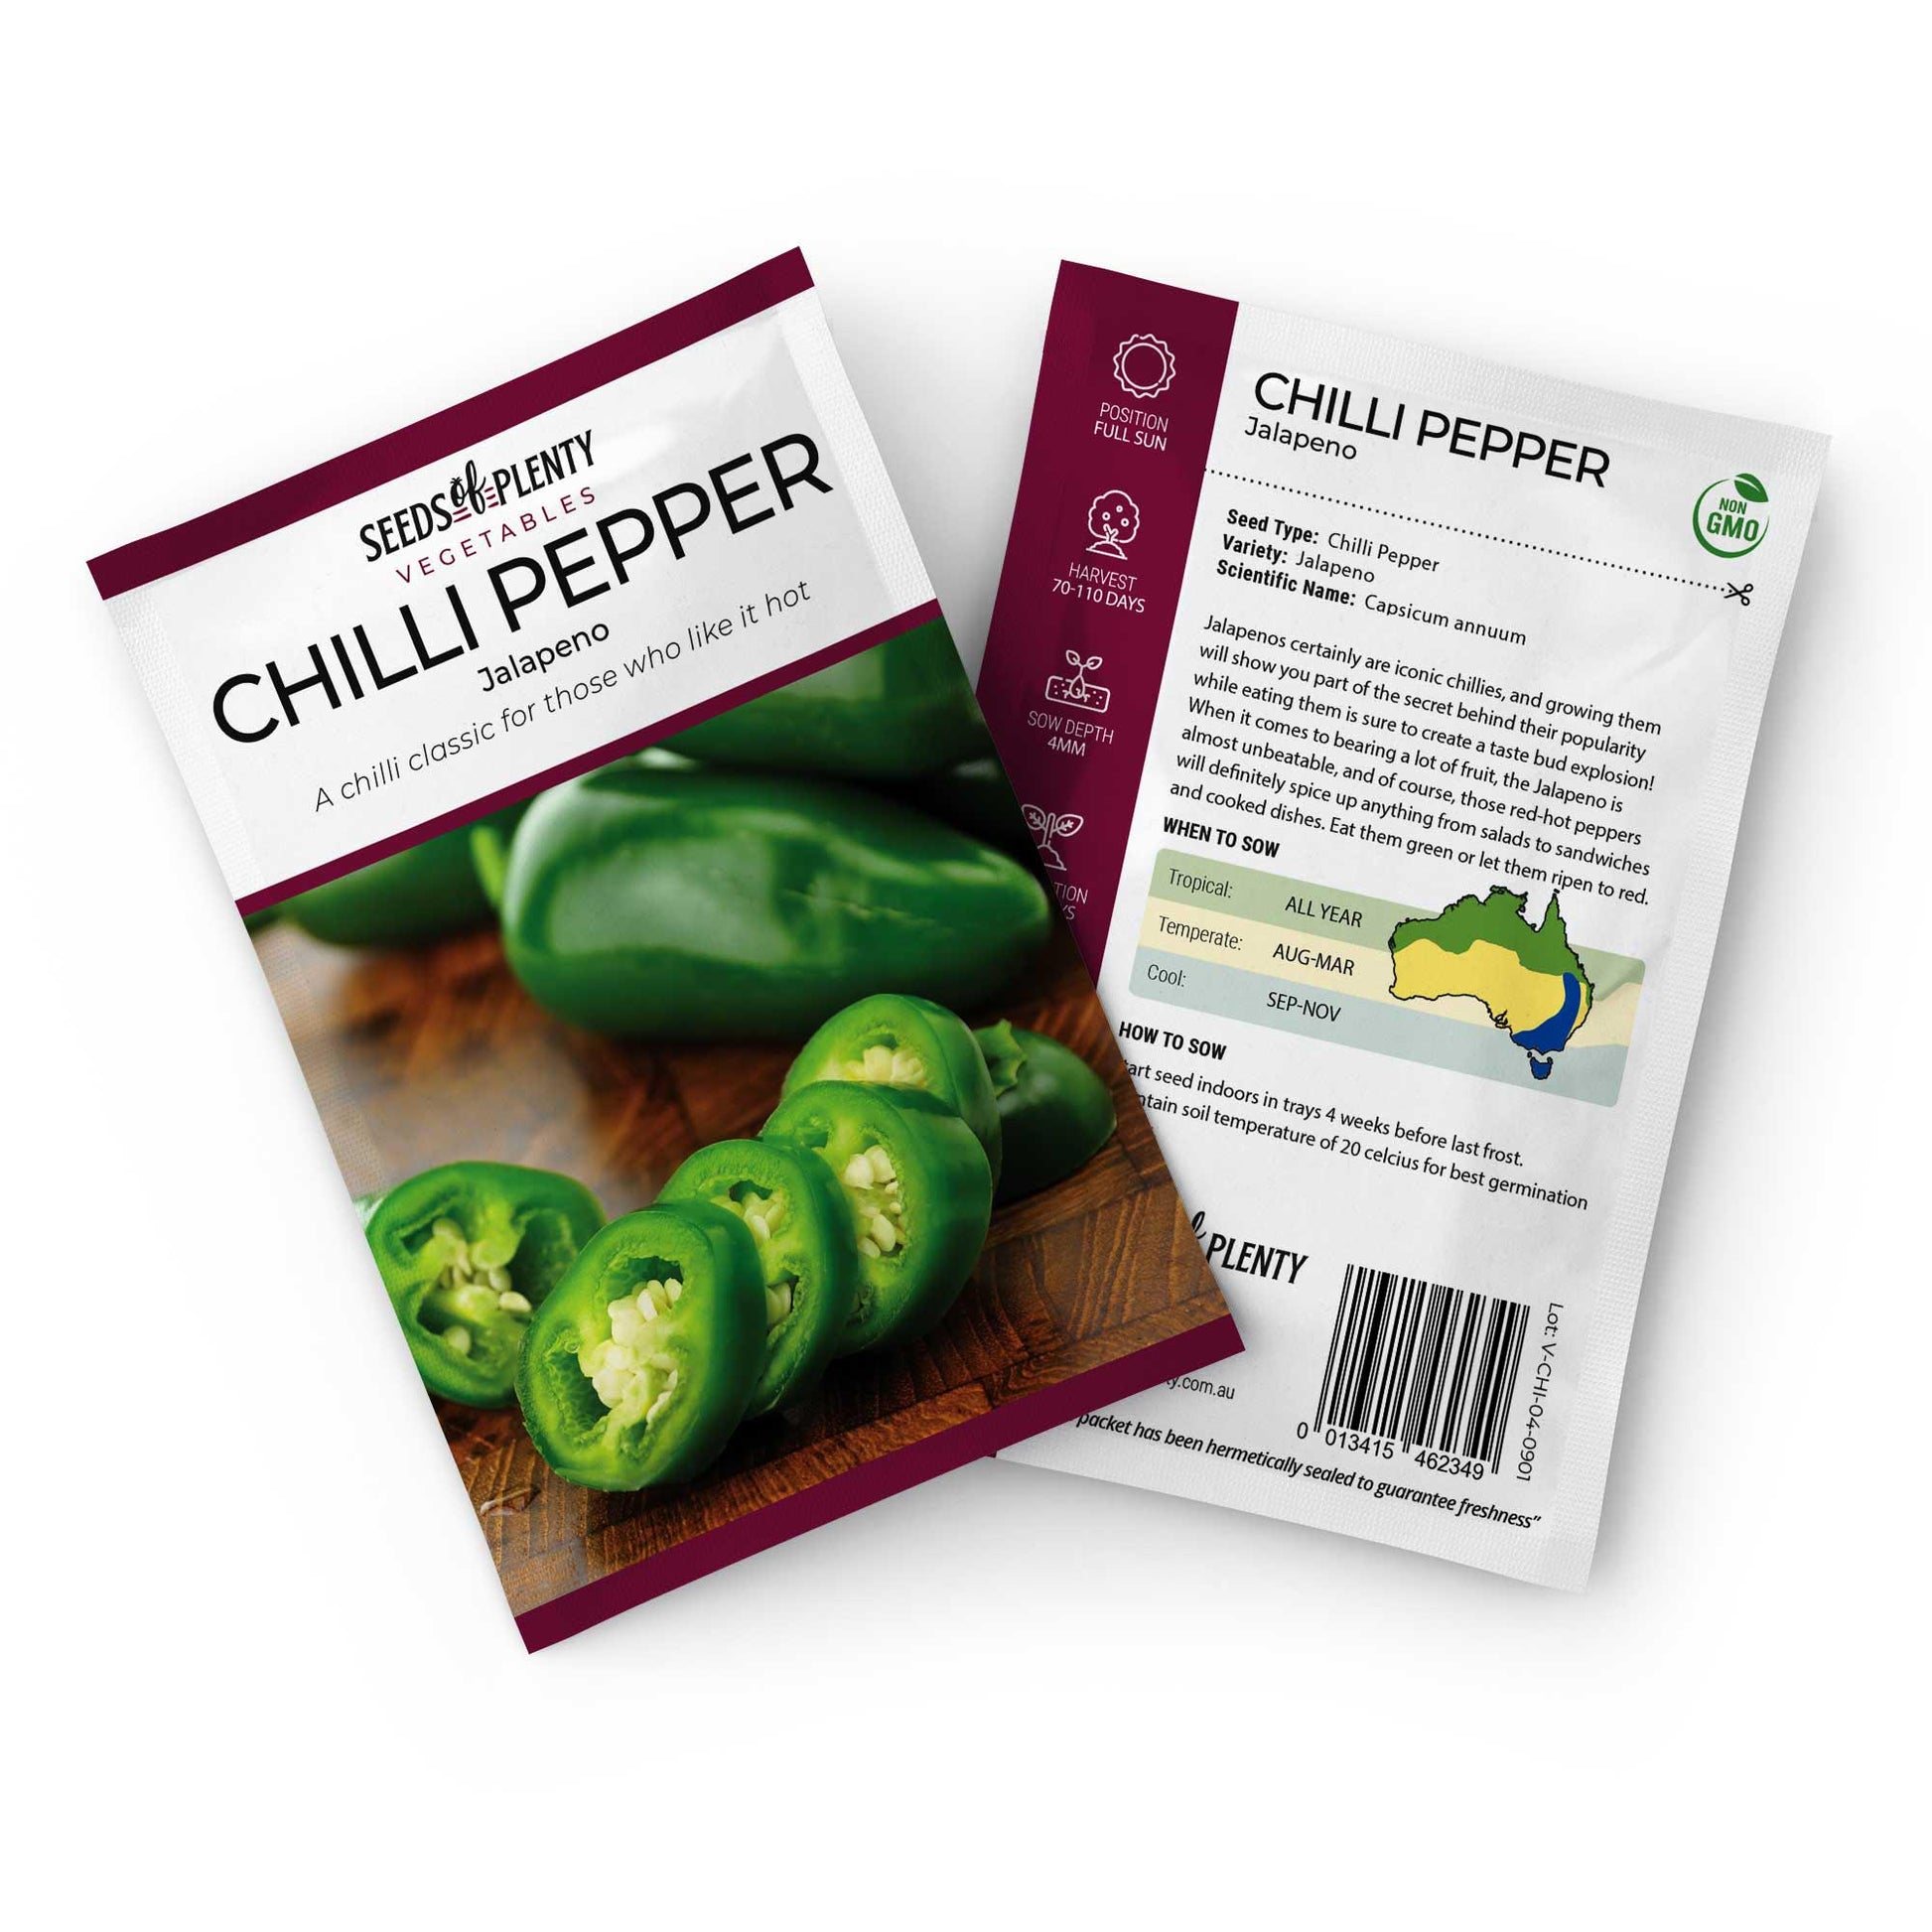 Jalapeno Peppers - All About Them - Chili Pepper Madness